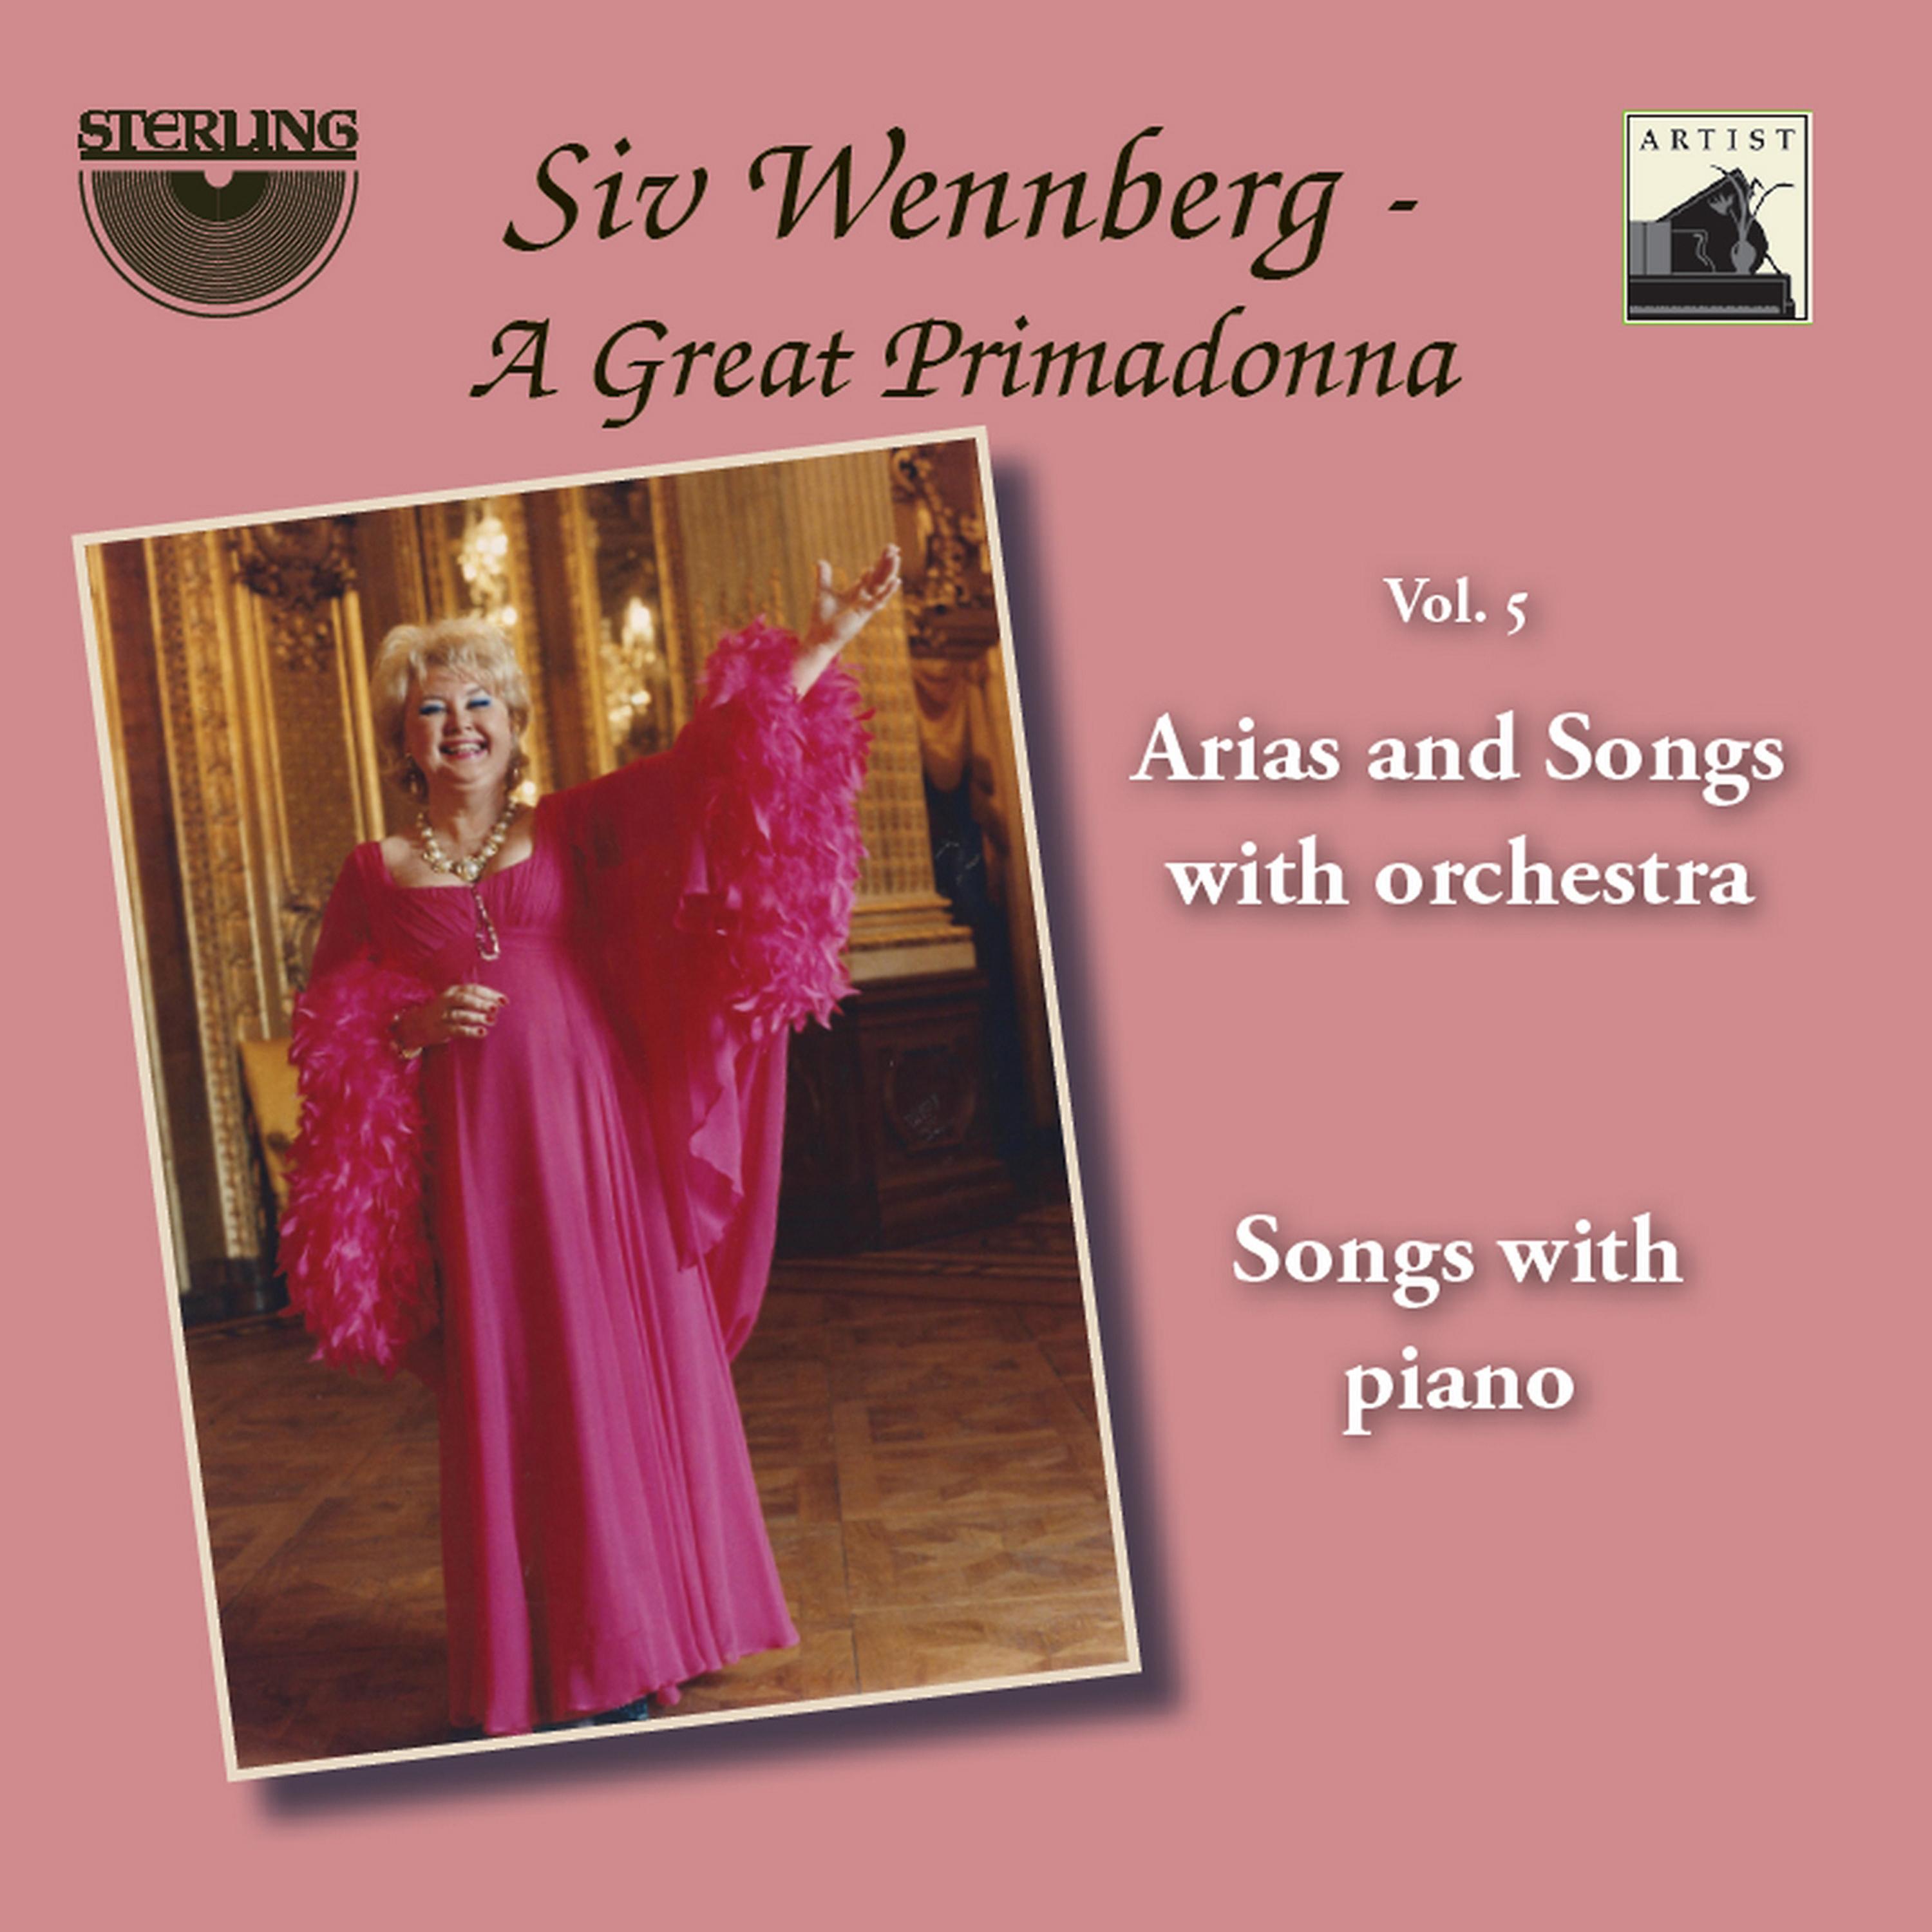 Постер альбома Siv Wennberg: A Great Primadonna, Vol. 5 "Arias and Songs with Orchestra"